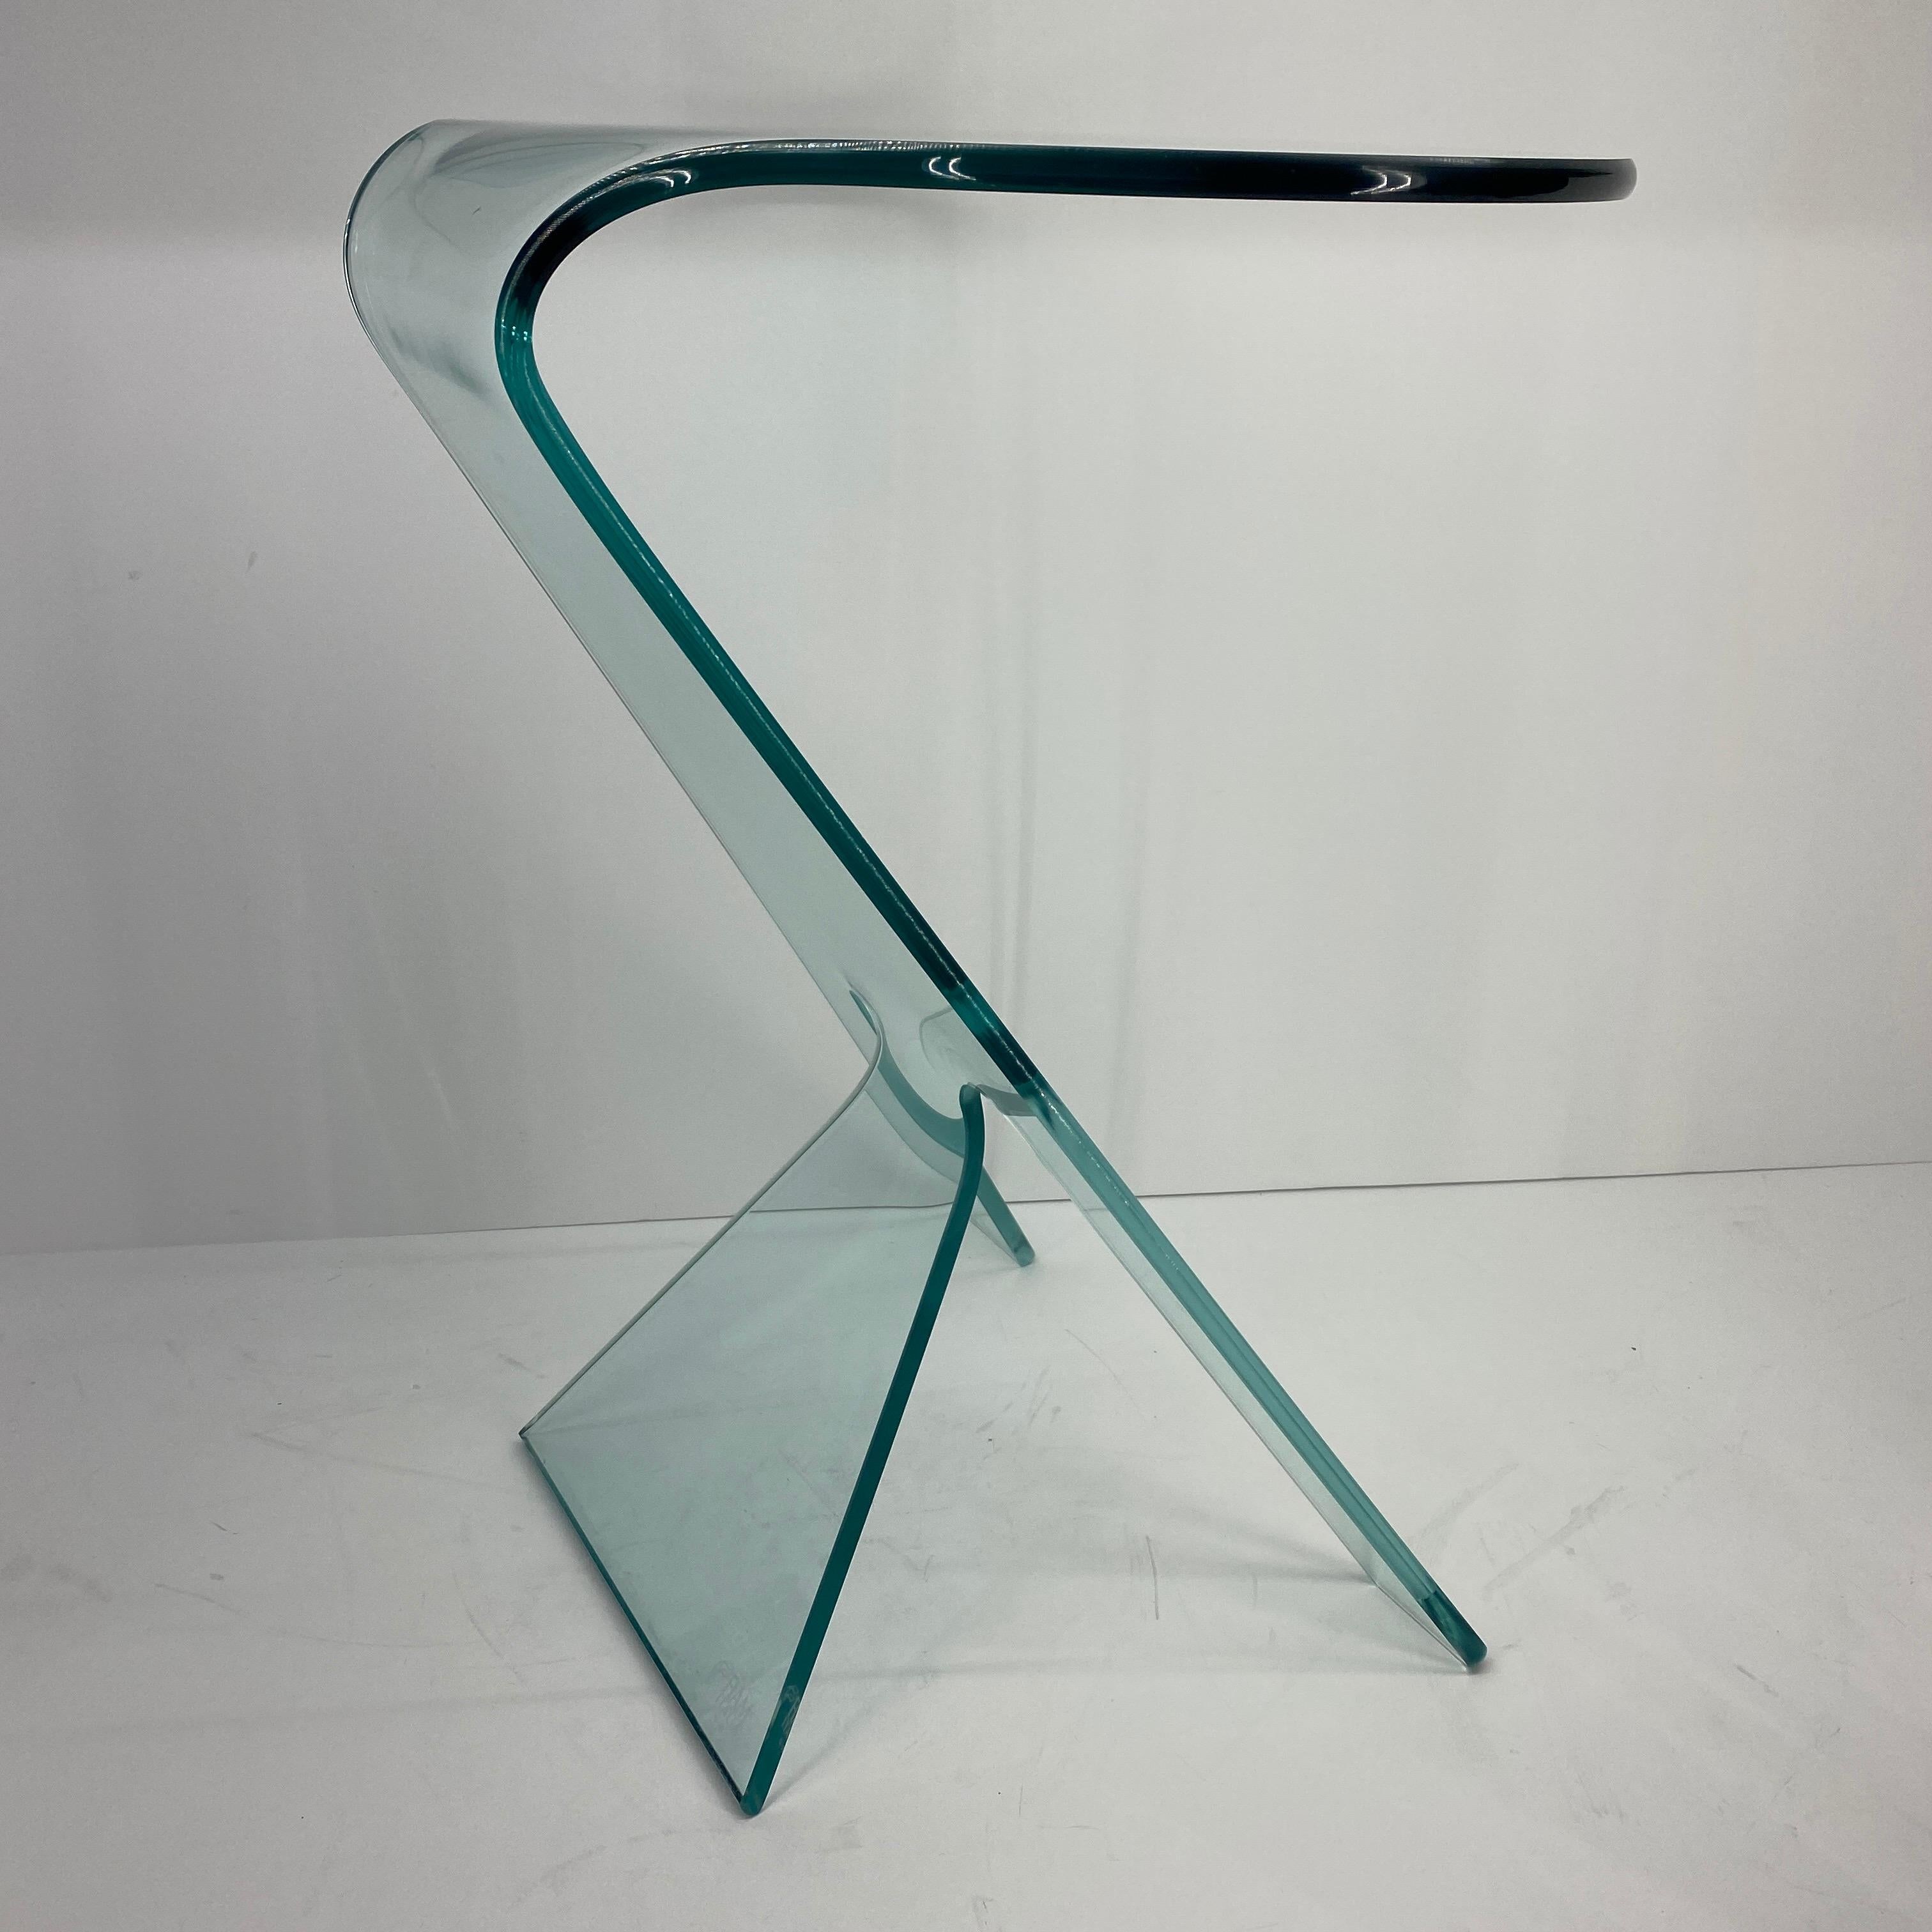 20th Century Modern Side Table Designed by Vittorio Livi For FIAM Italy